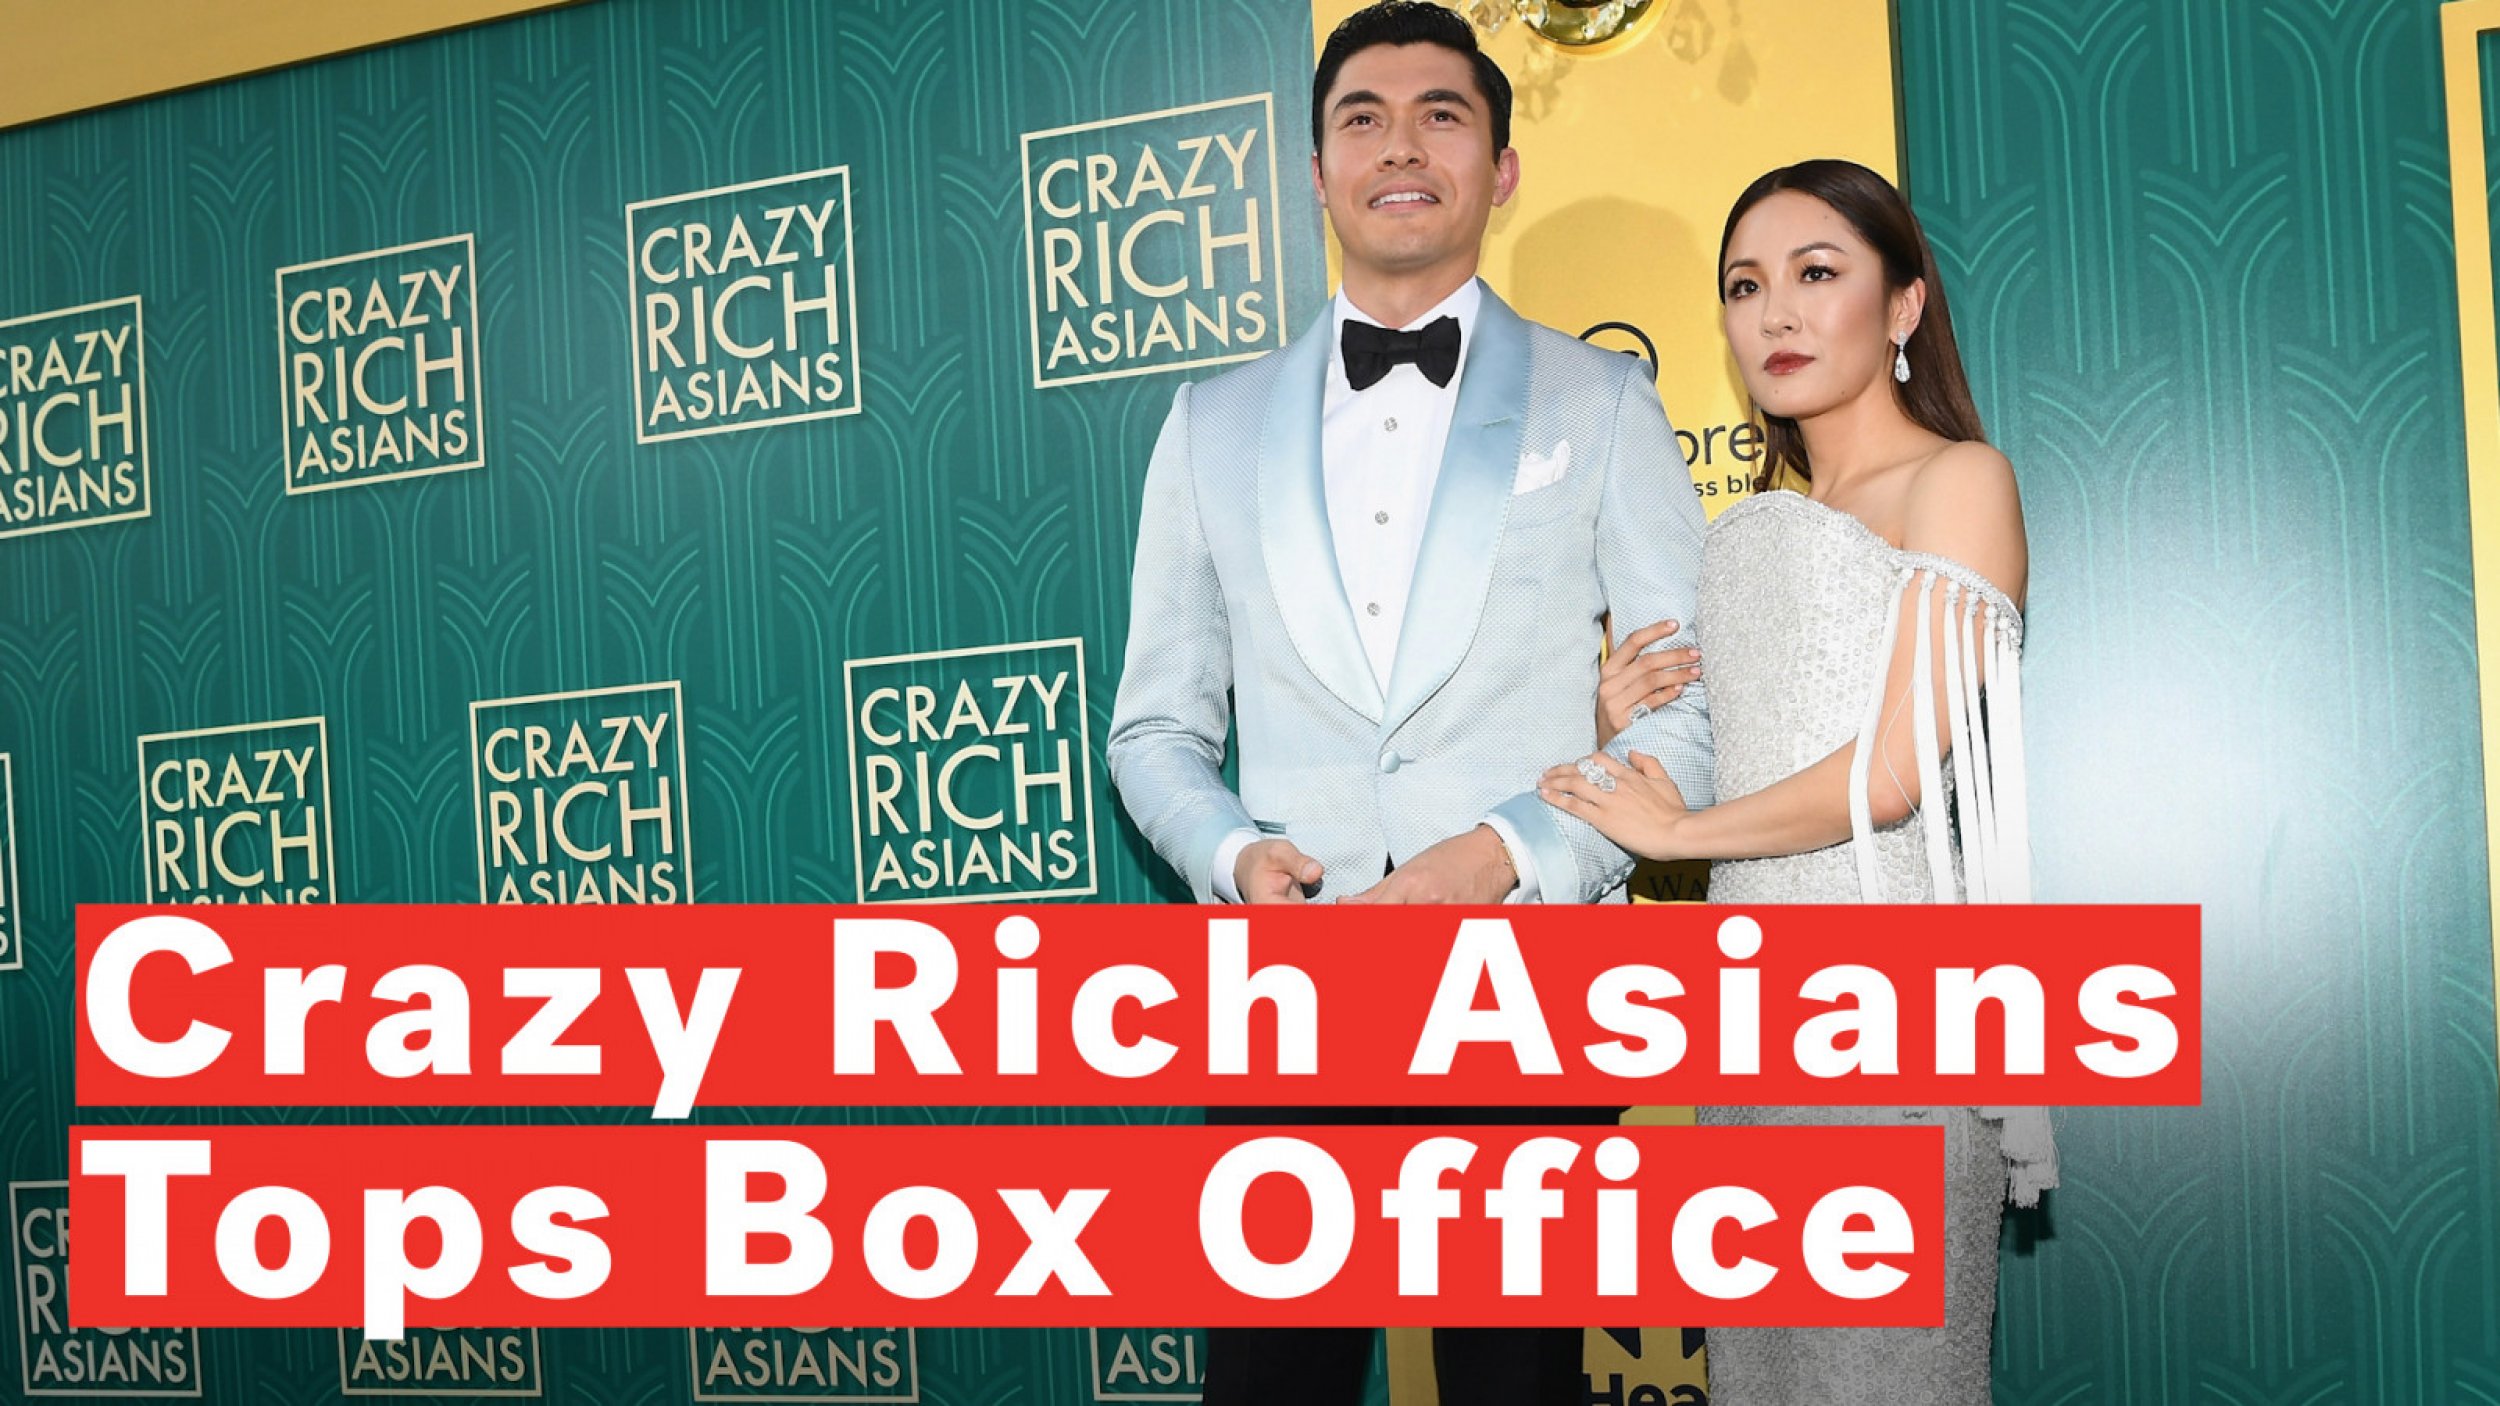 Crazy Rich Asians Tops U.S. Box Office With 34M In First 5 Days